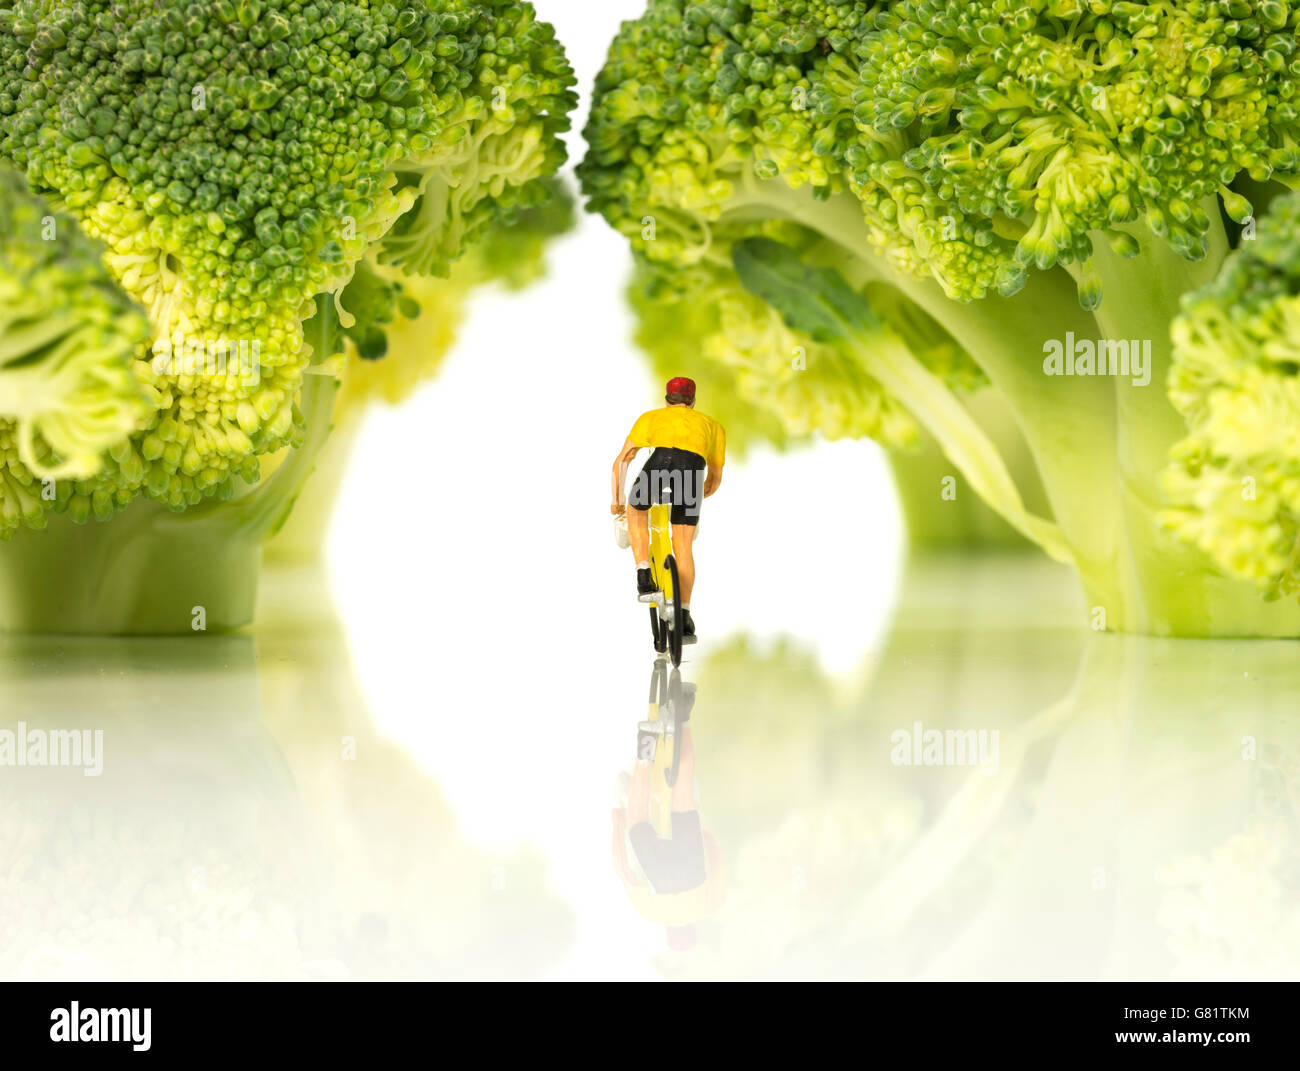 miniature figure man on bike in yellow jersey on tour de france in green forest Stock Photo